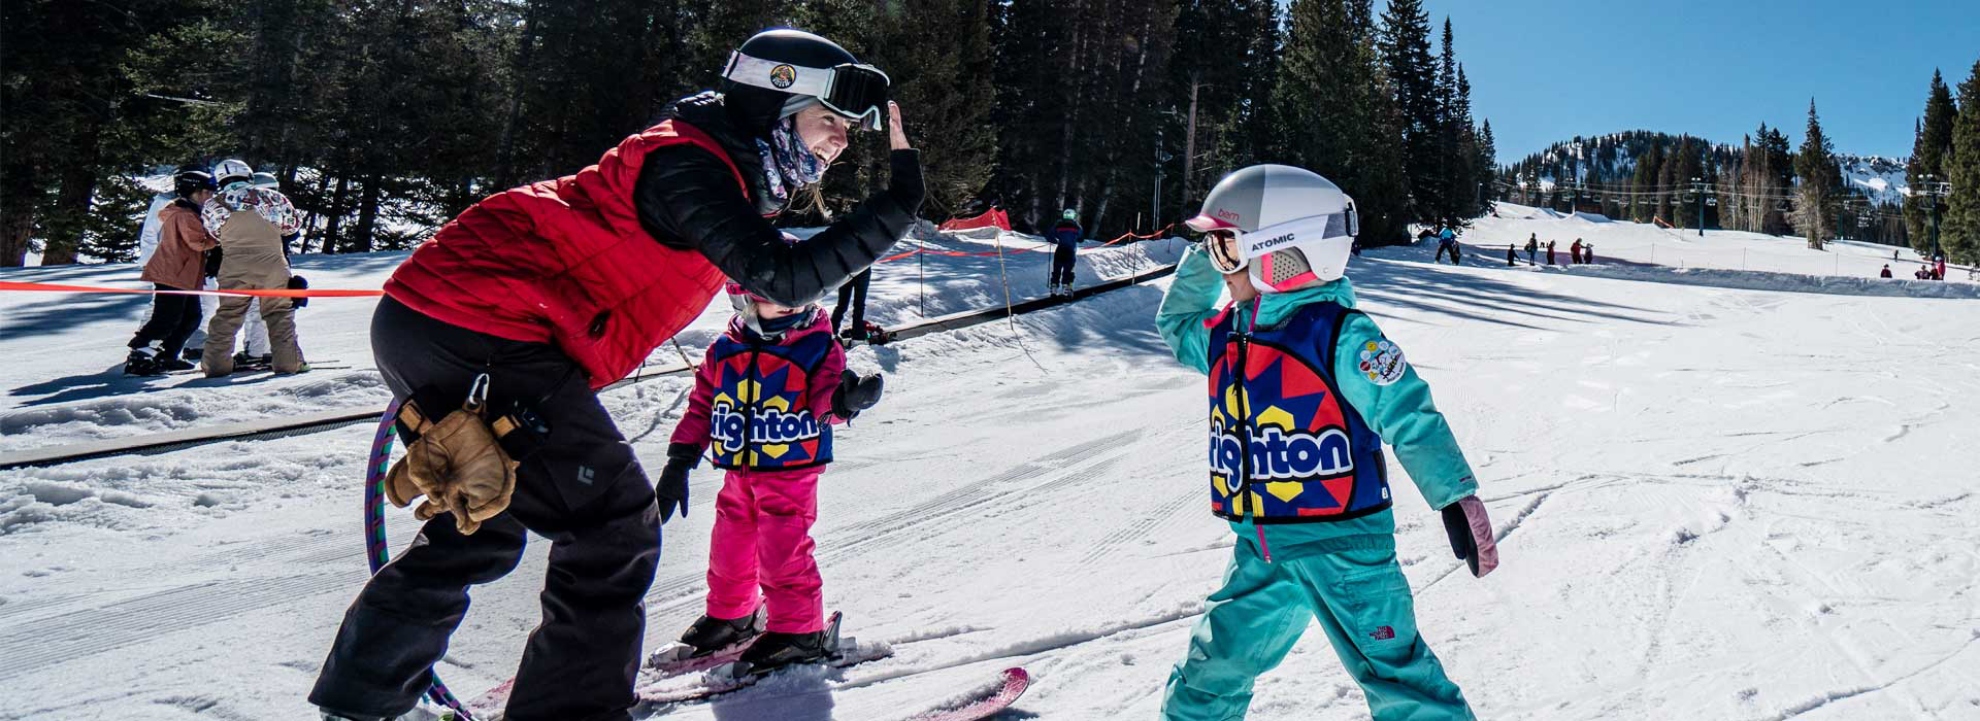 A Brighton Resort instructor teaching a young children how to ski.